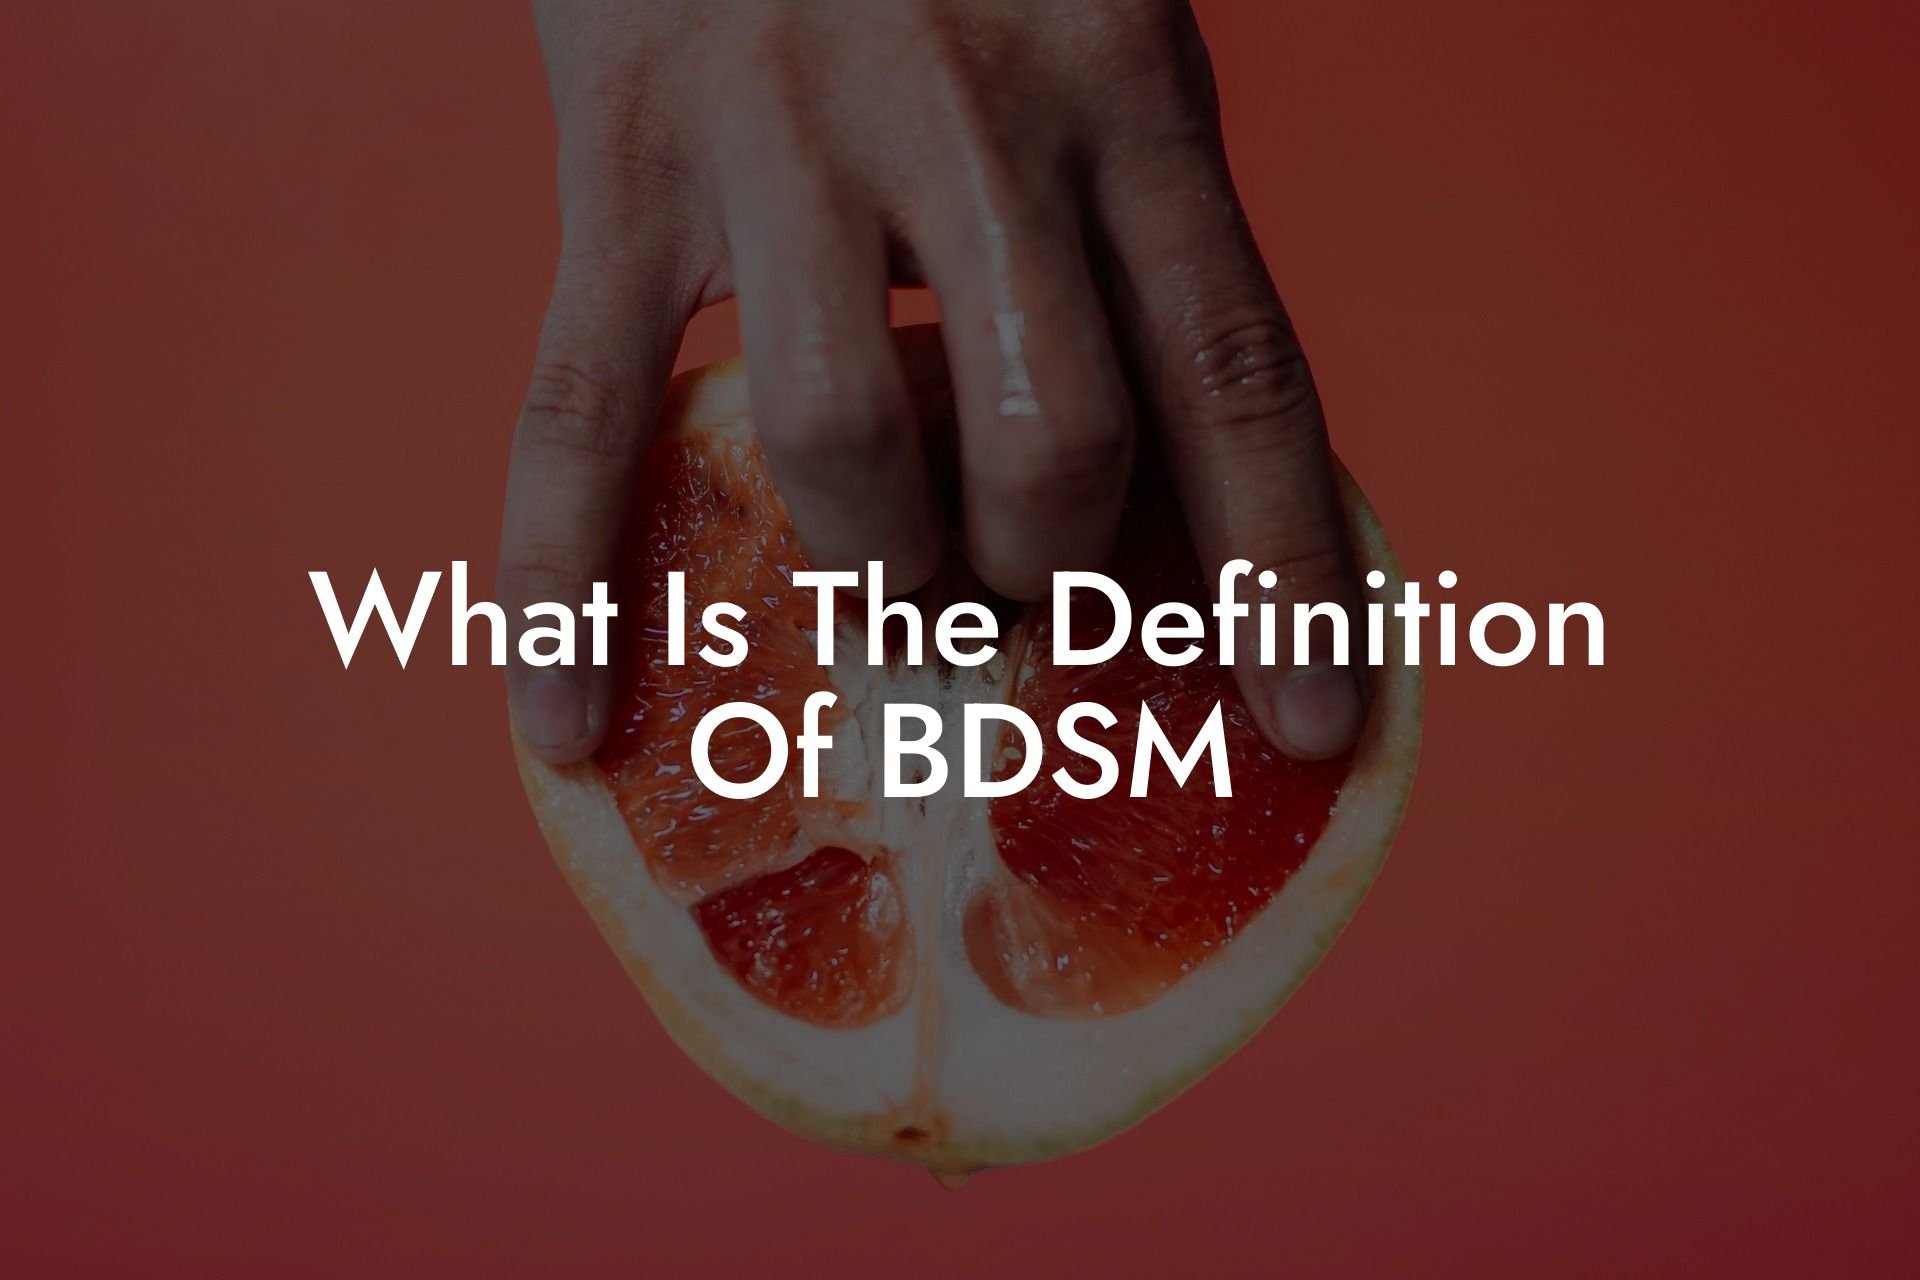 What Is The Definition Of BDSM